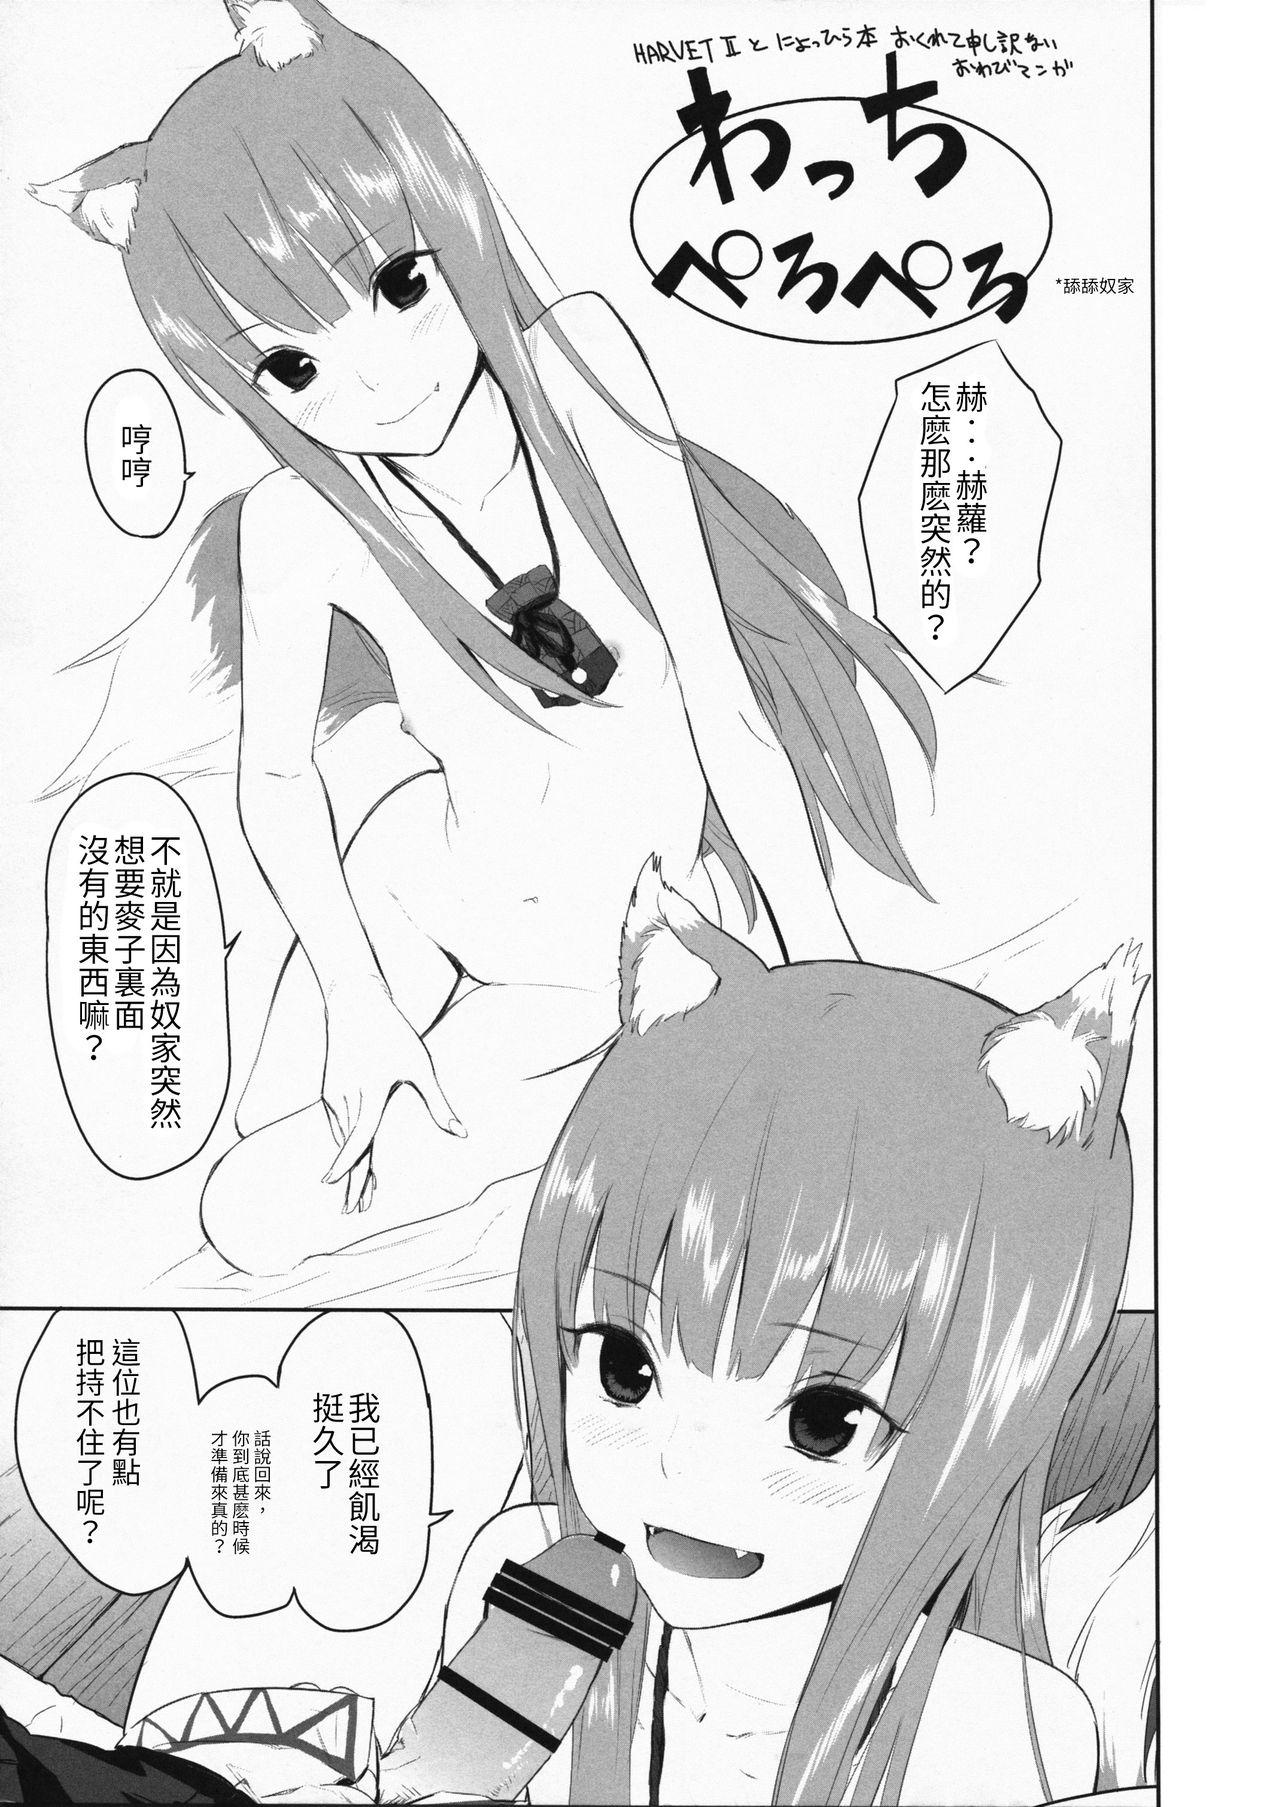 Shecock Ajisai Maiden vol.1 - Code geass Spice and wolf Dragons crown Un-go Girl Sucking Dick - Page 11